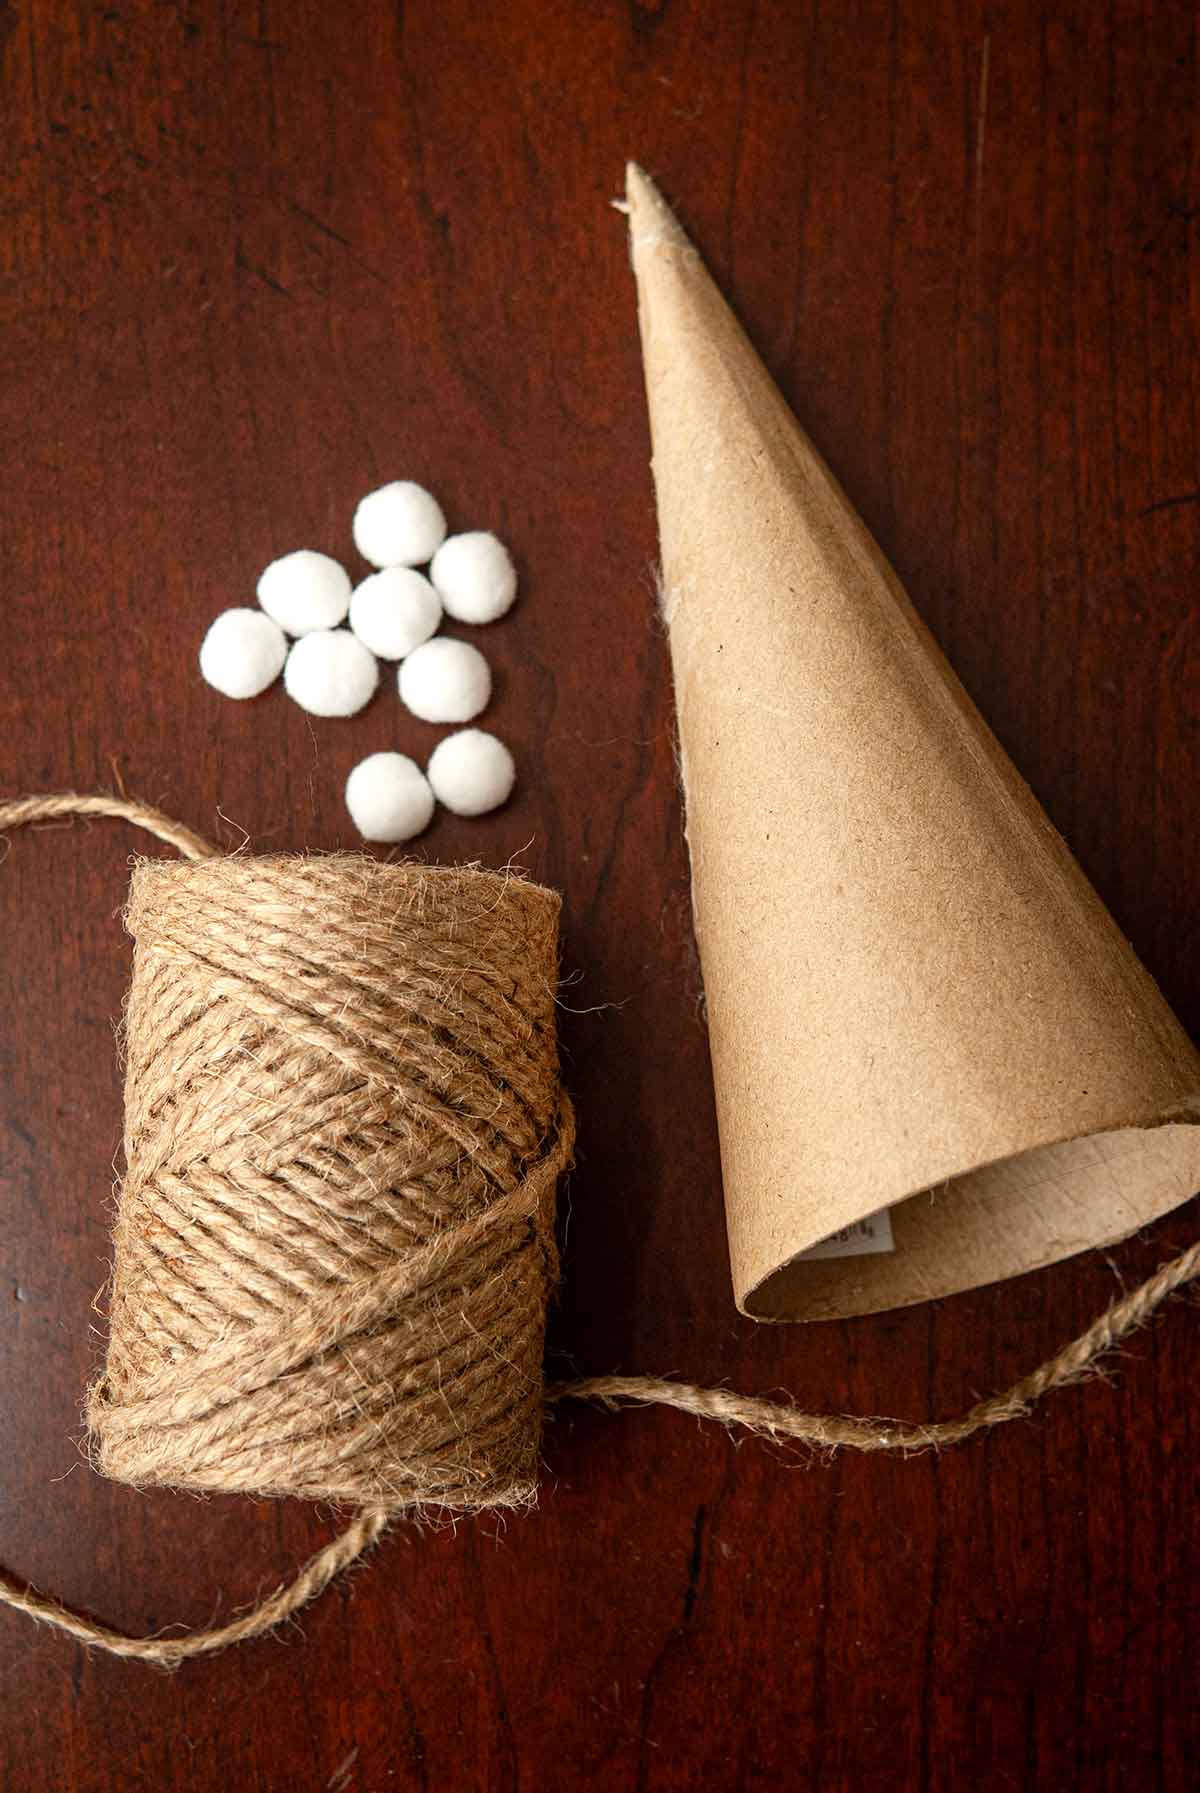 A paper mache cone, about 10 small pompoms, and a spool of twine on a table.